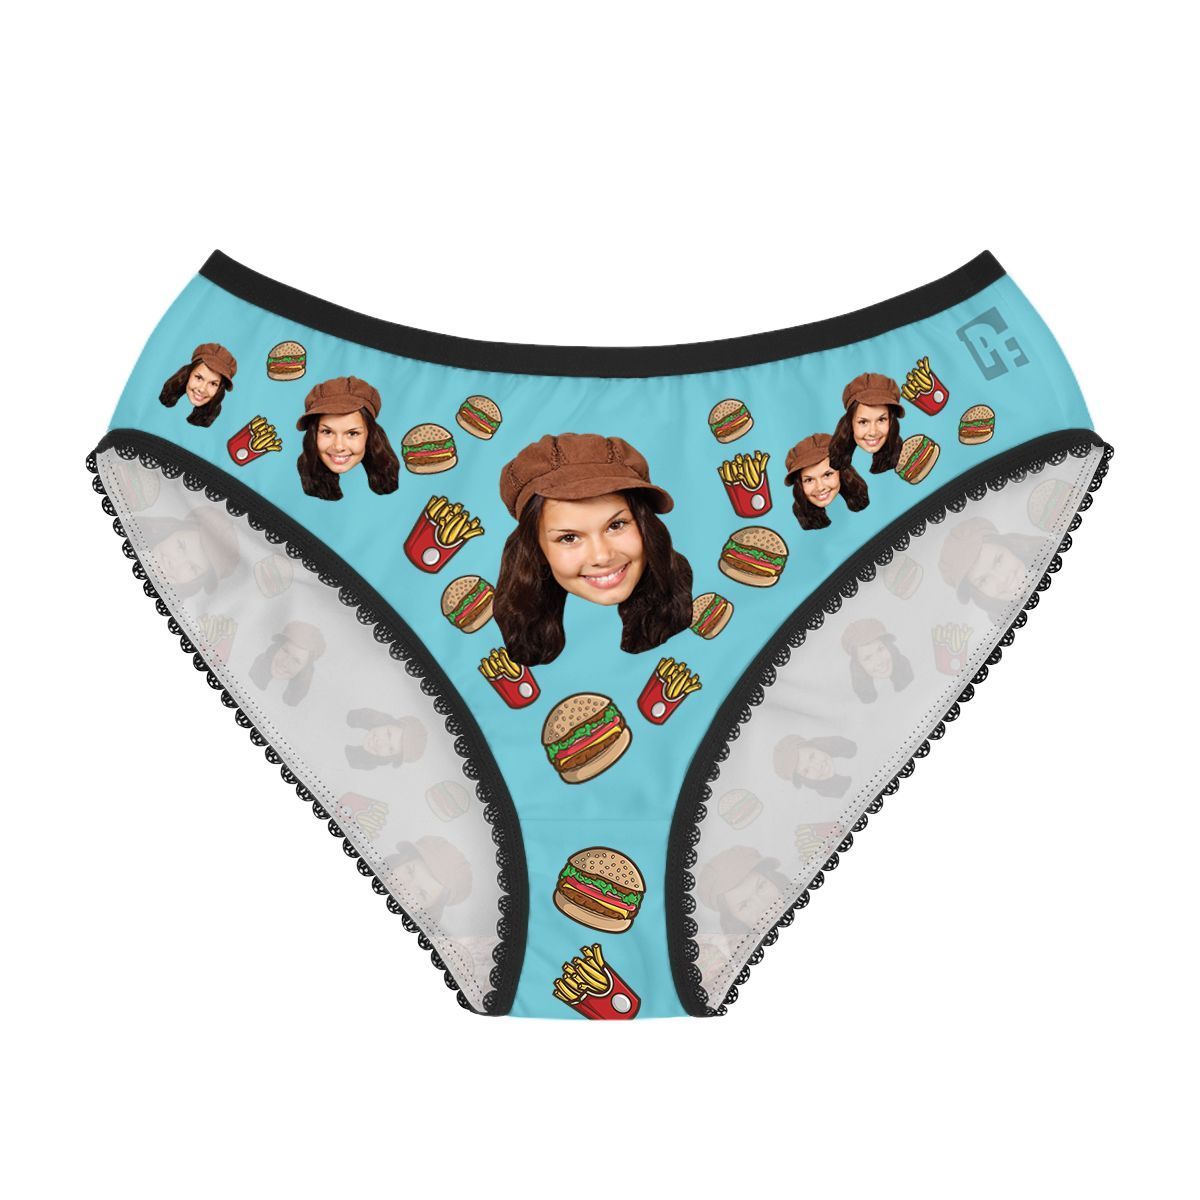 Blue Fastfood women's underwear briefs personalized with photo printed on them